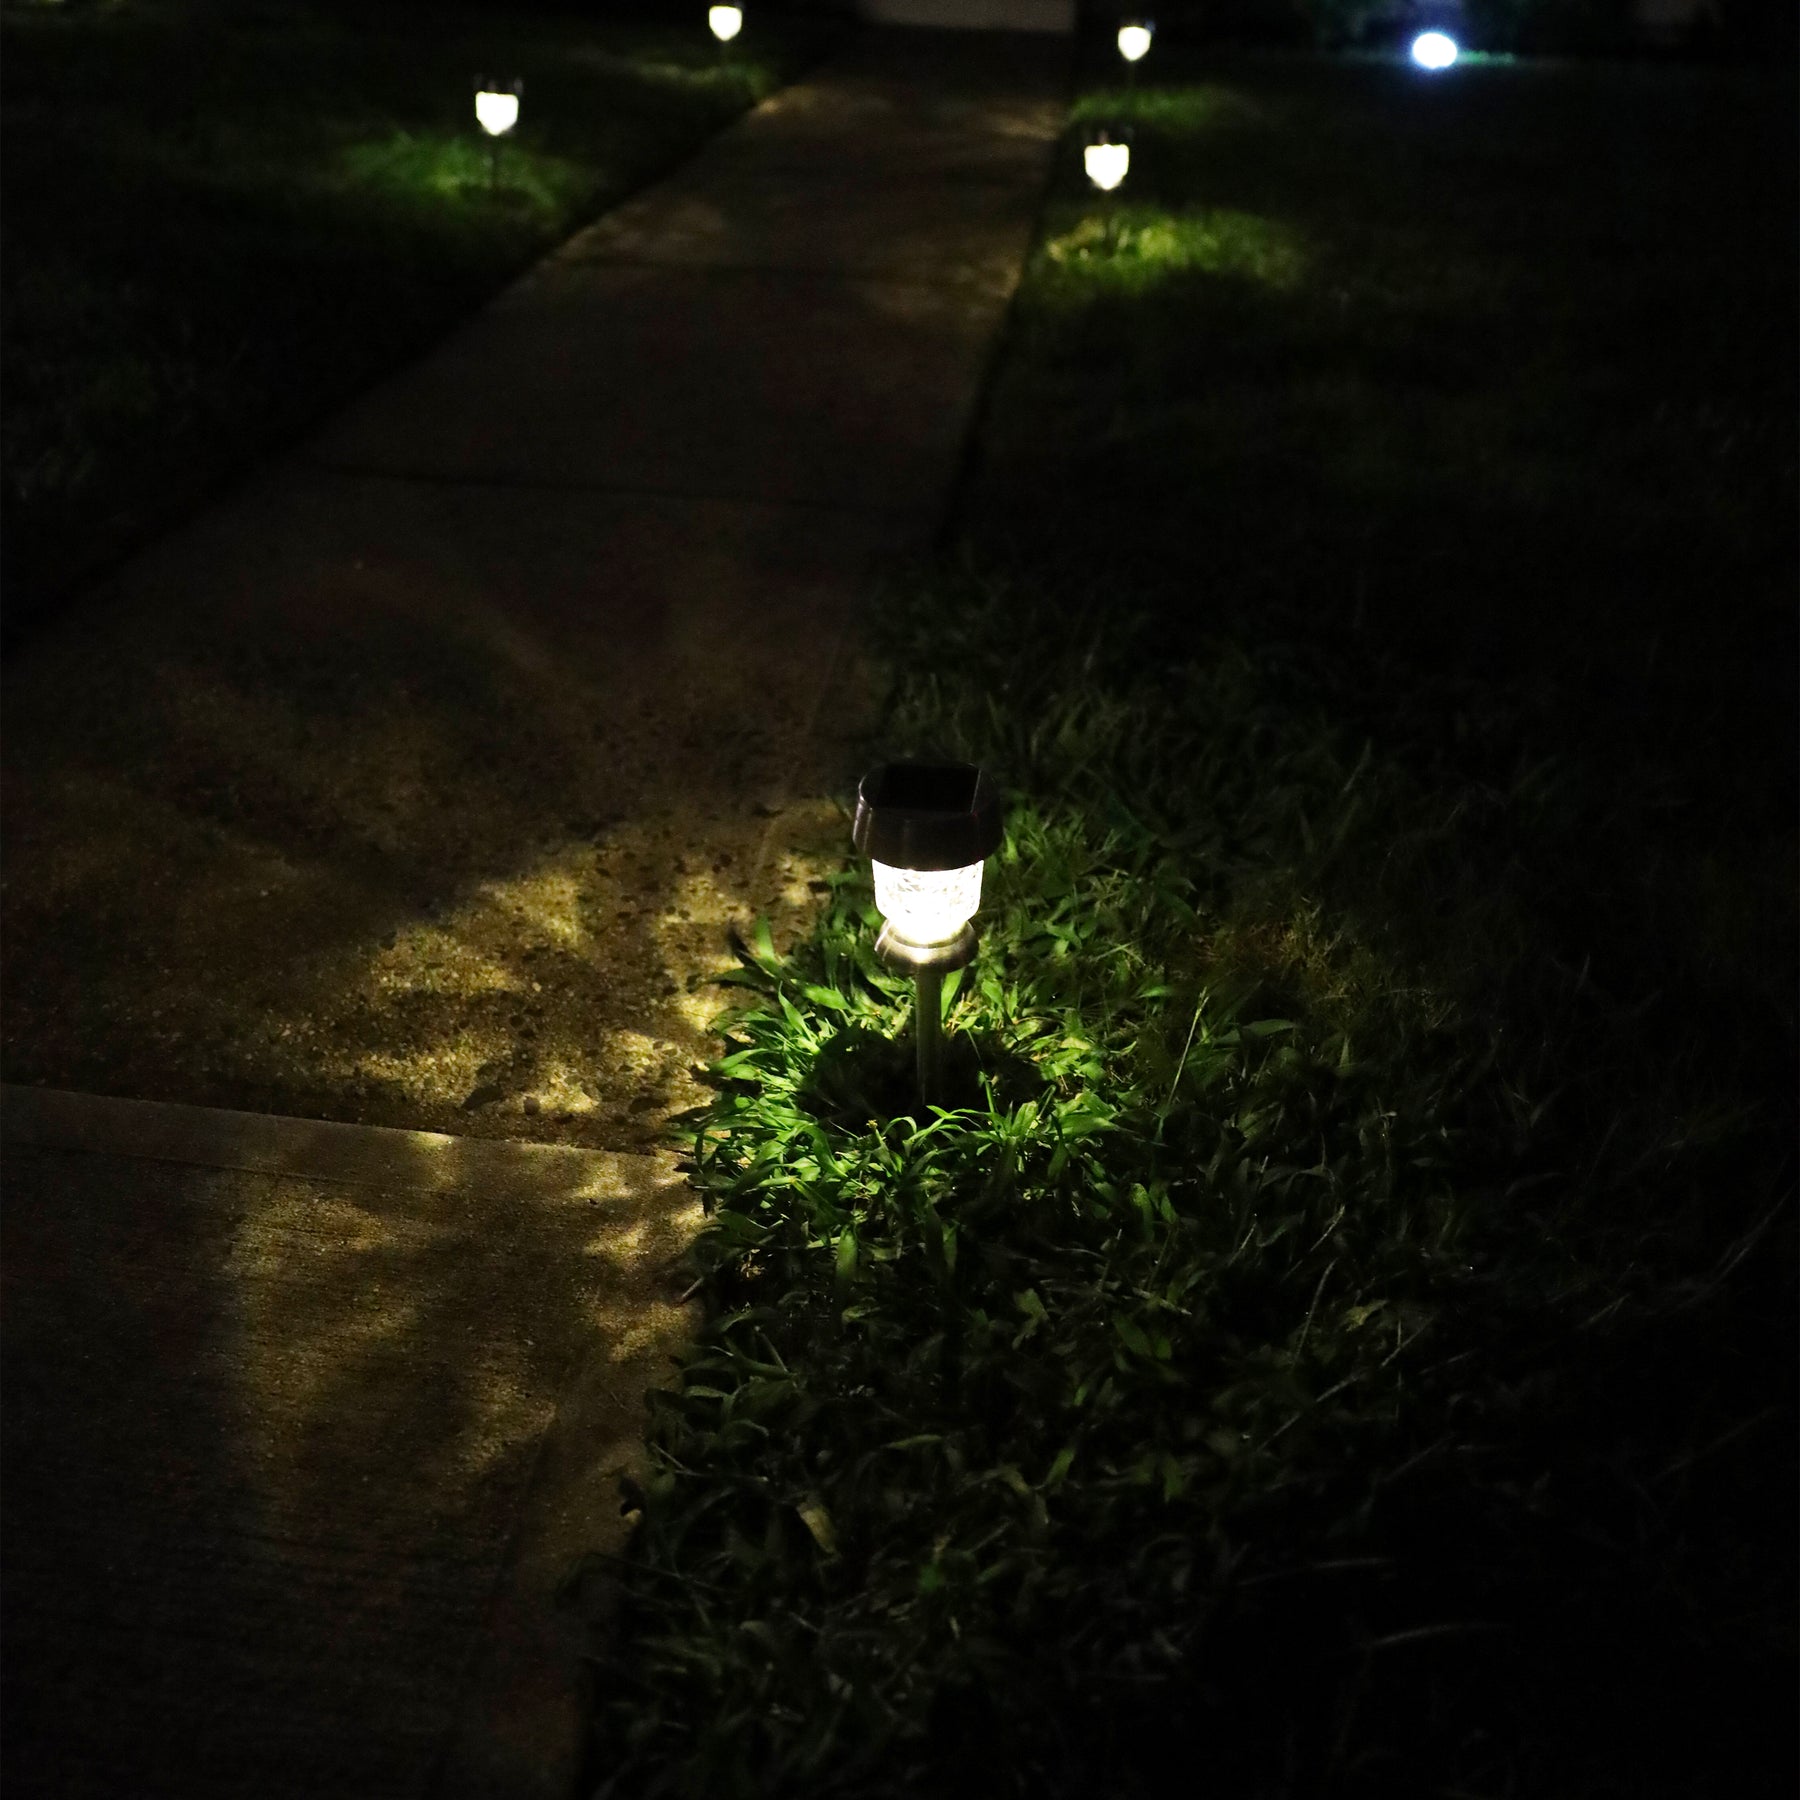 14-inch Stainless Steel Solar Powered LED Pathway Light lighting up a front walkway at night.